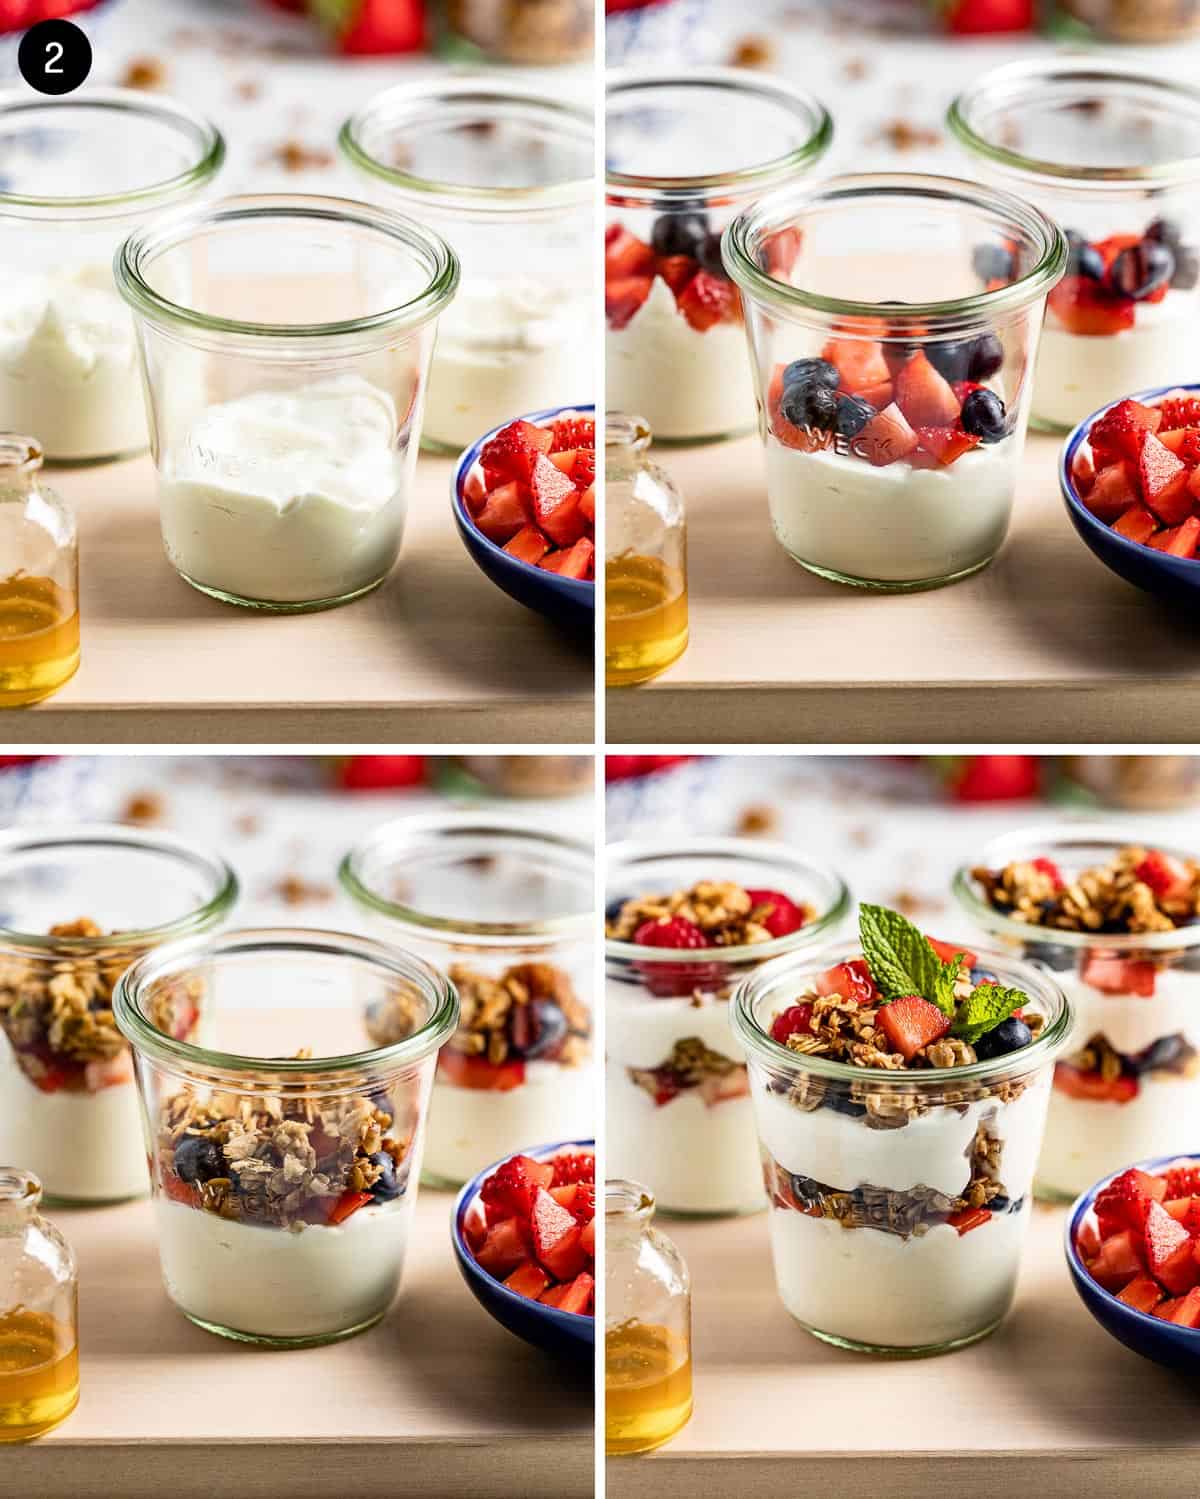 photos showing how to layer parfait with berries and granola